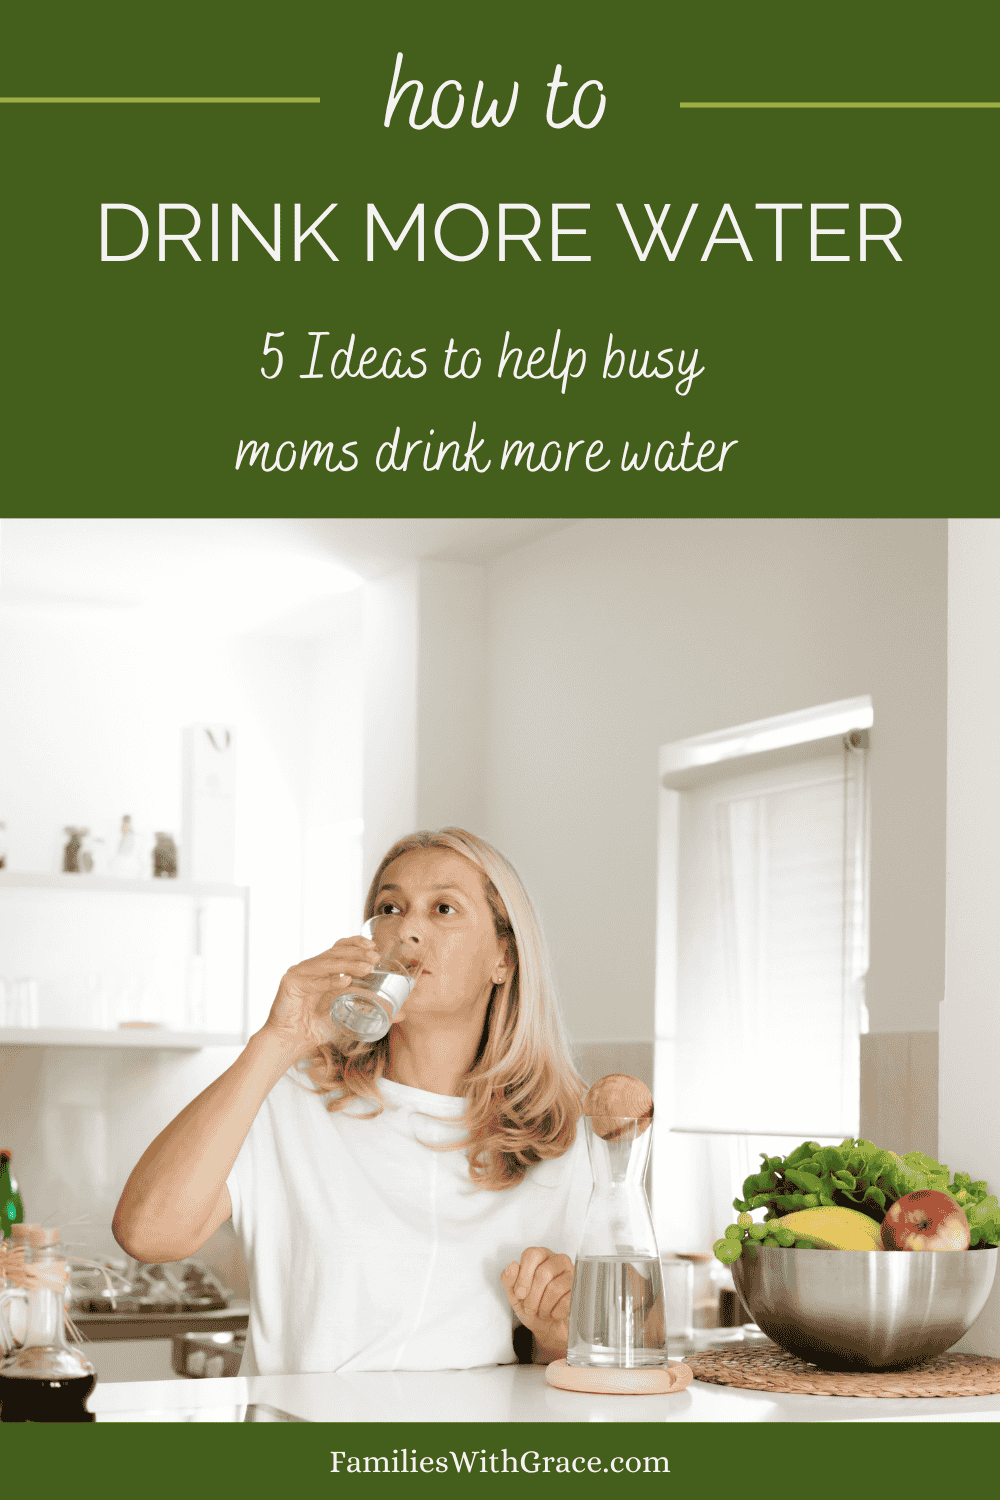 How busy moms can drink more water